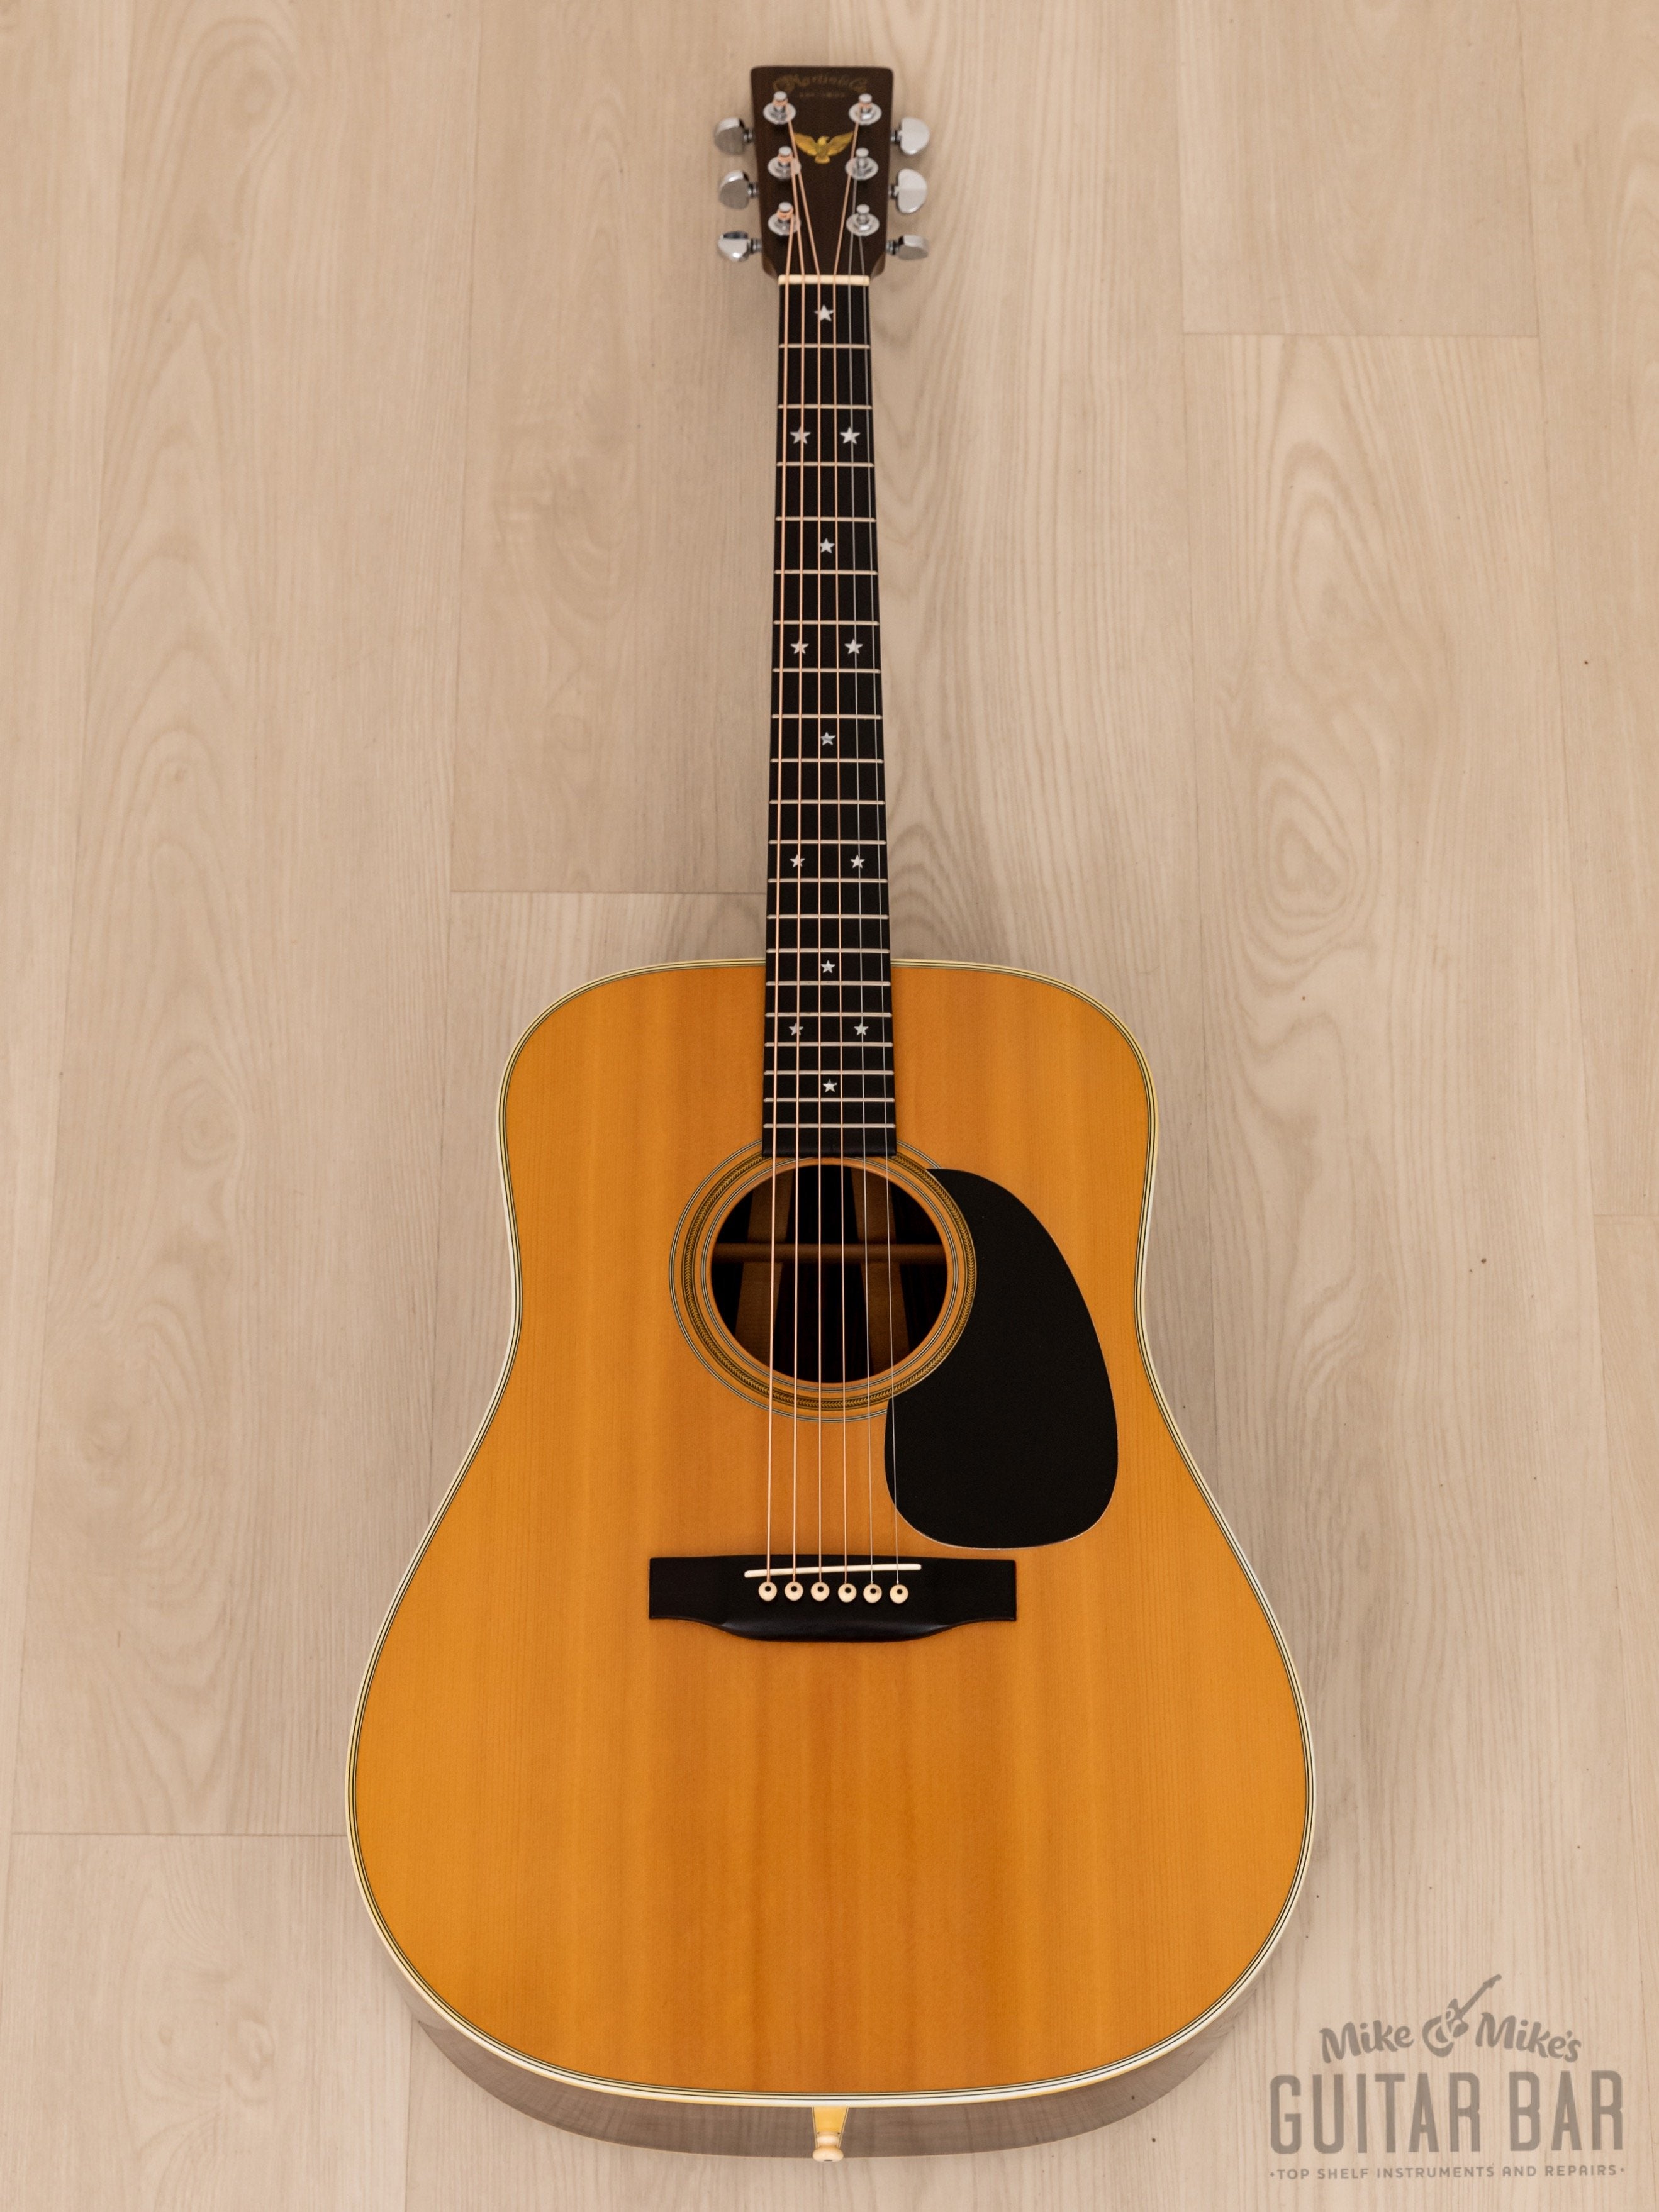 1976 Martin D-76 Vintage Limited Edition Bicentennial Dreadnought Acoustic Guitar w/ Adirondack Top